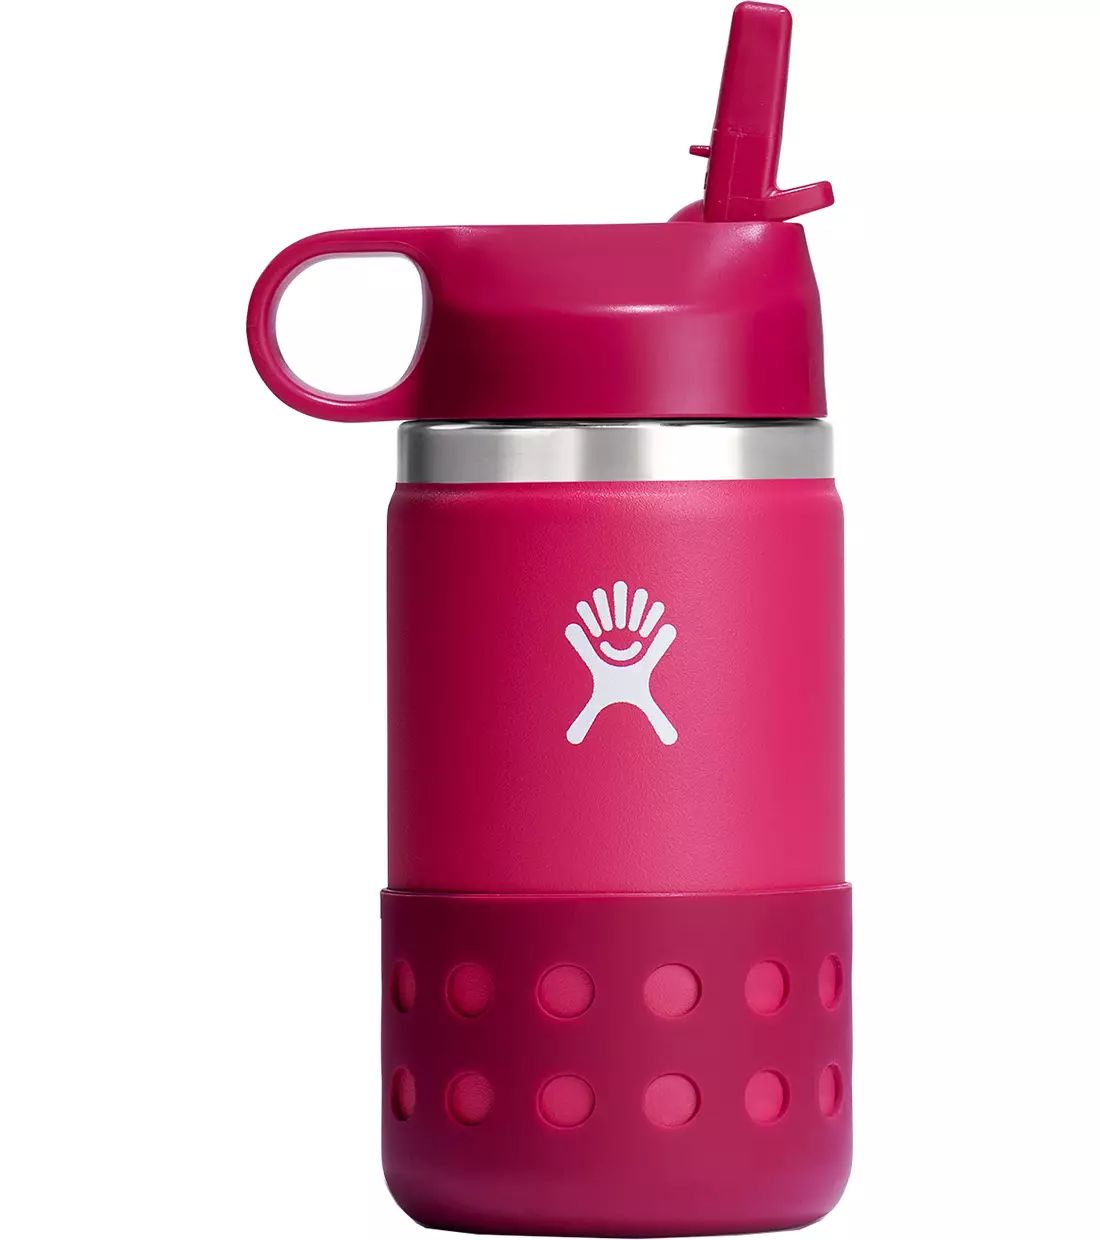 Hydro Flask 12 oz. Kids' Wide Mouth Bottle with Straw Lid and Boot | Publiclands | Public Lands